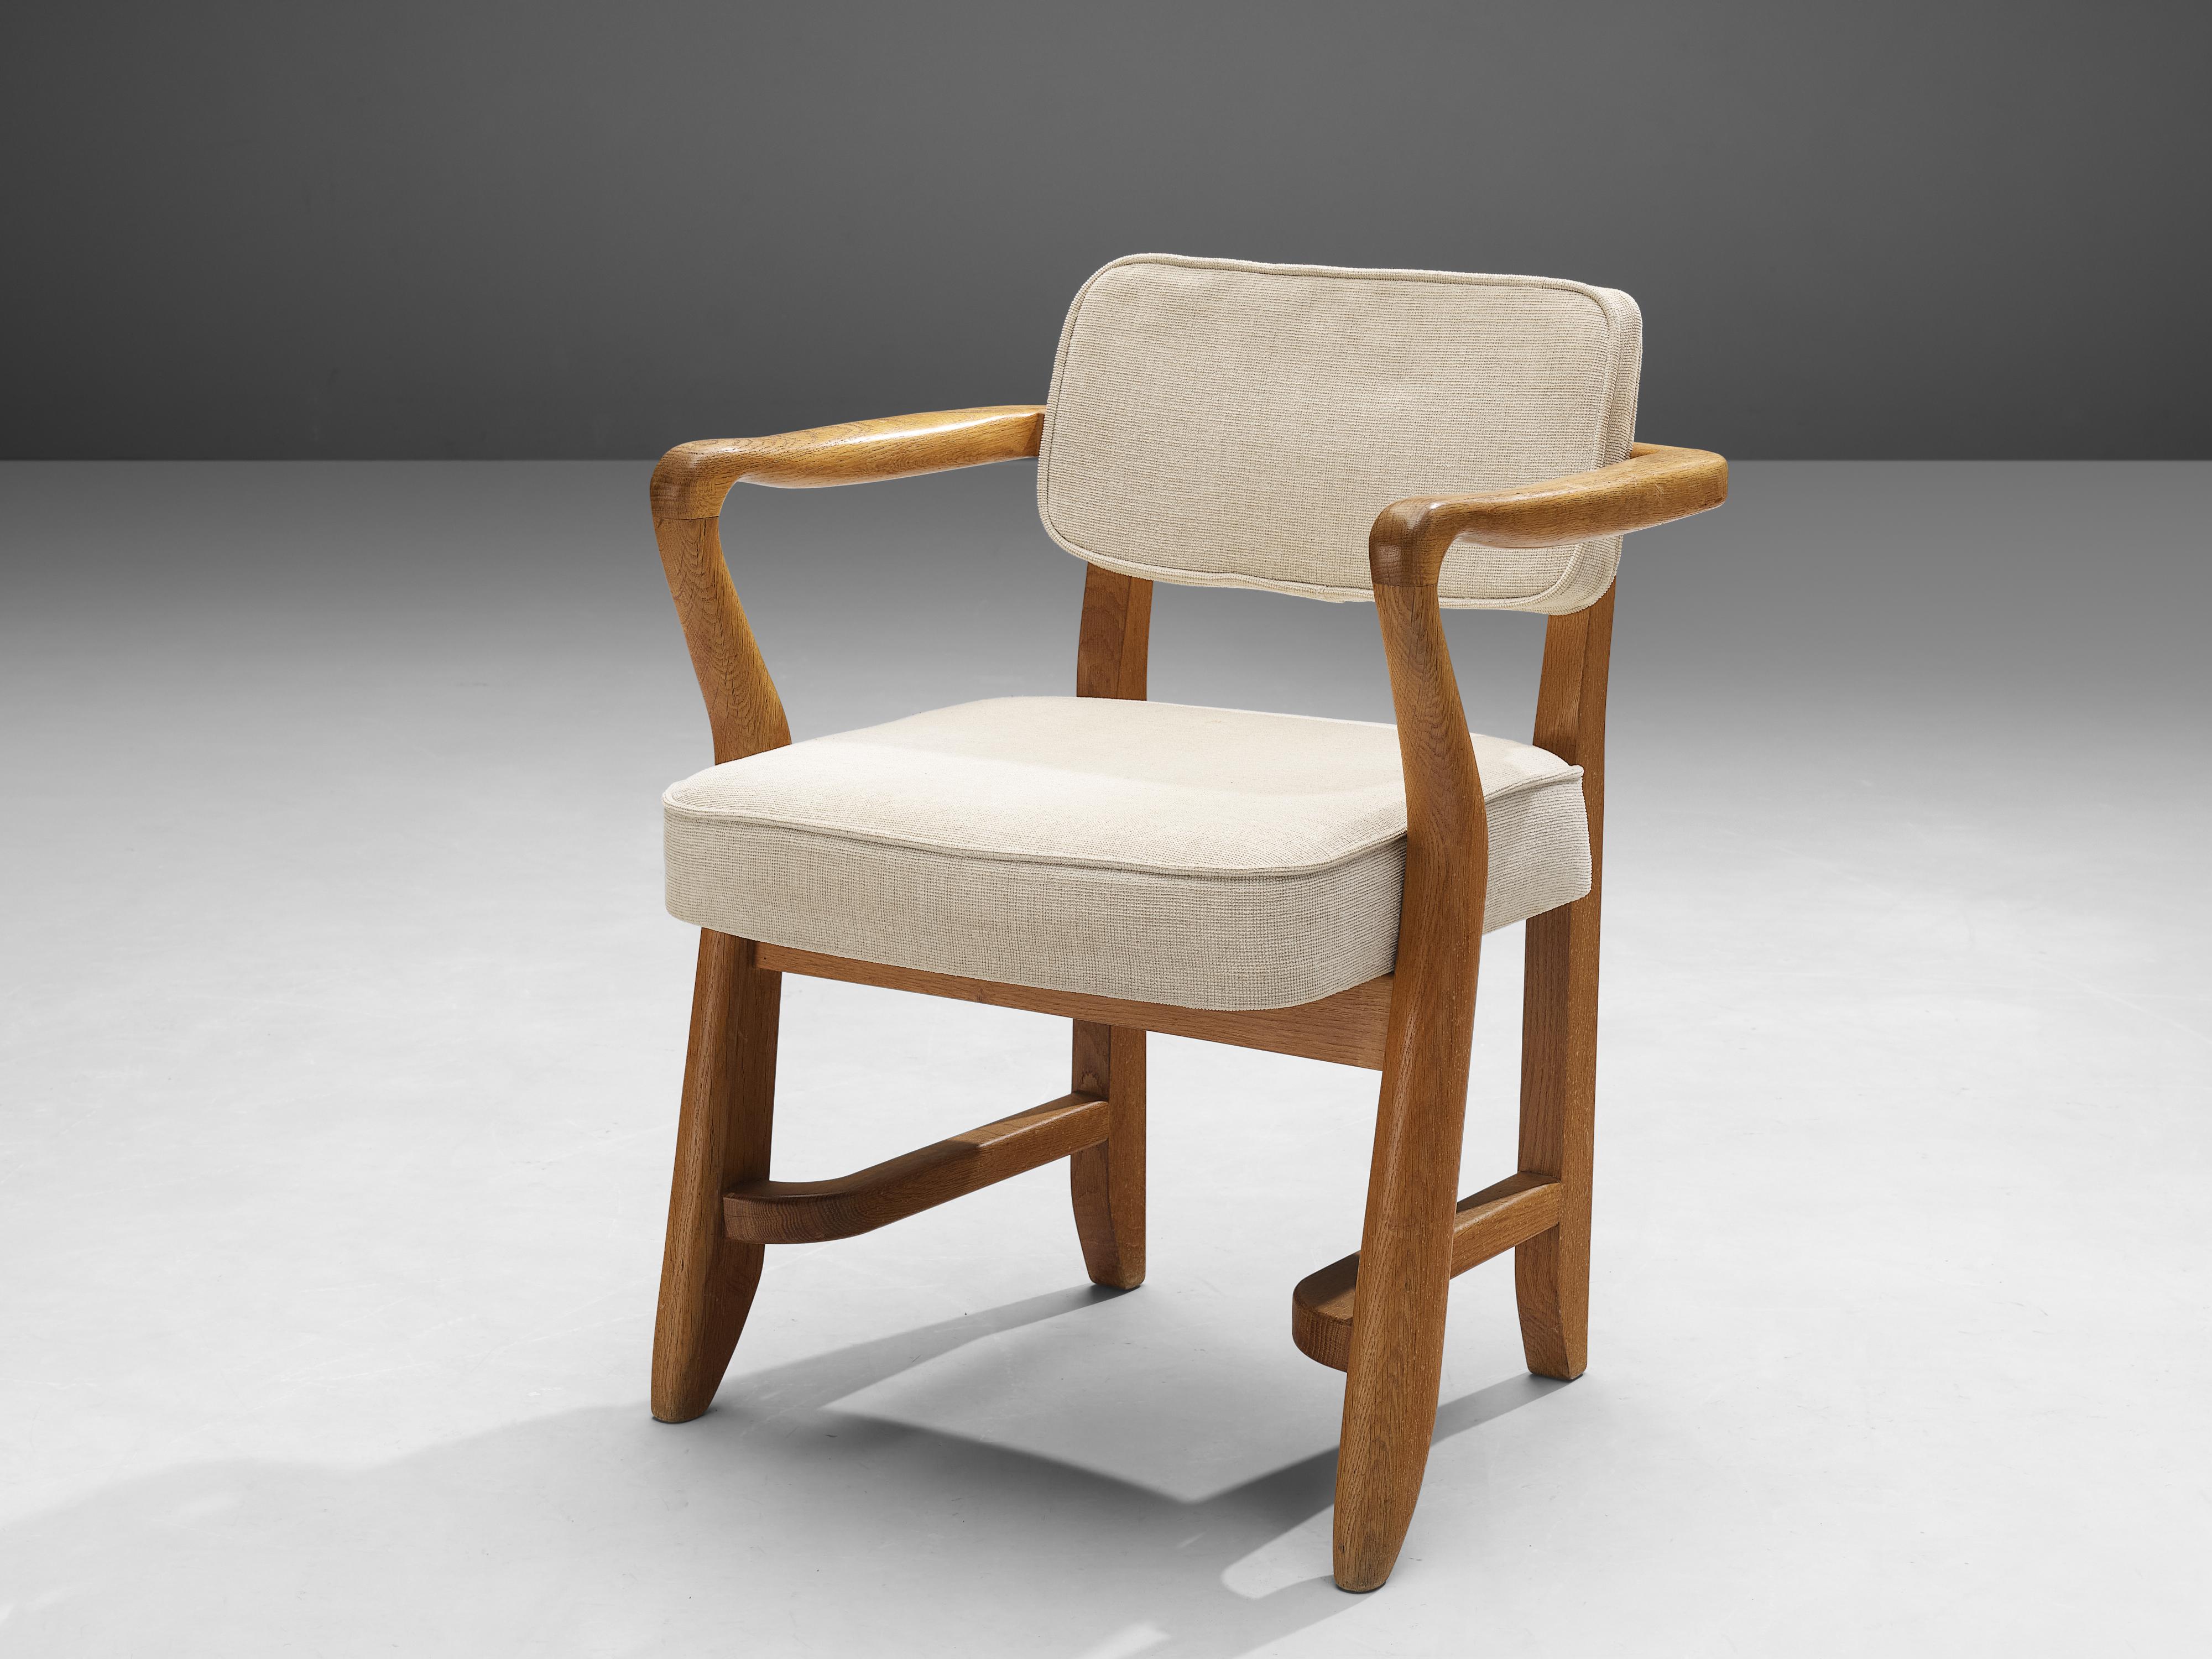 Guillerme & Chambron, 'Denis' armchairs, fabric, oak, France, 1950s

This sculptural easy chair is designed by Guillerme & Chambron. The duo is known for their high quality solid oak furniture. The sculptural armchair has an interesting open